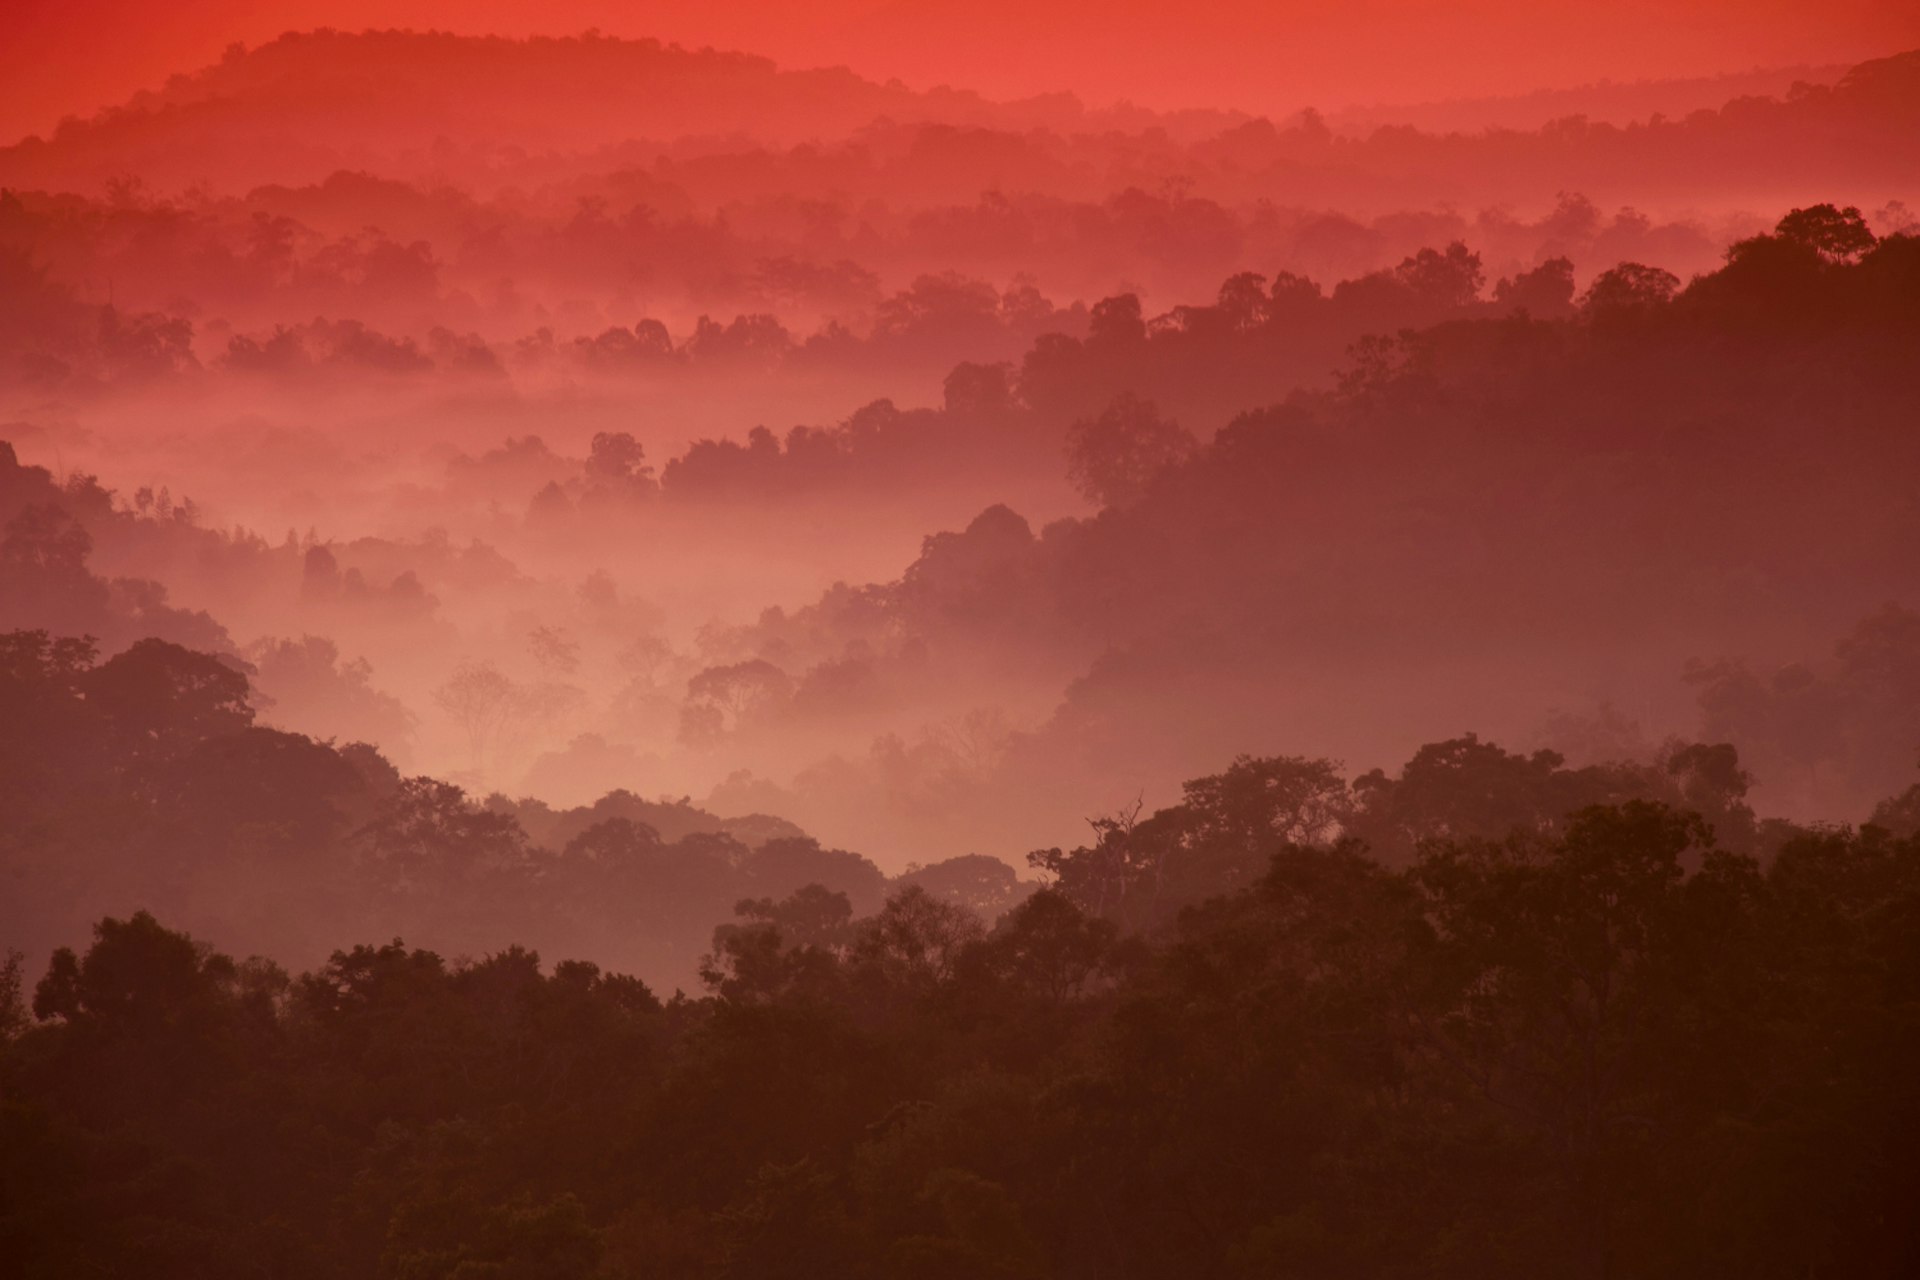 Sunrise at Nam Nao National Park, northeastern Thailand © Marit321 / Getty Images